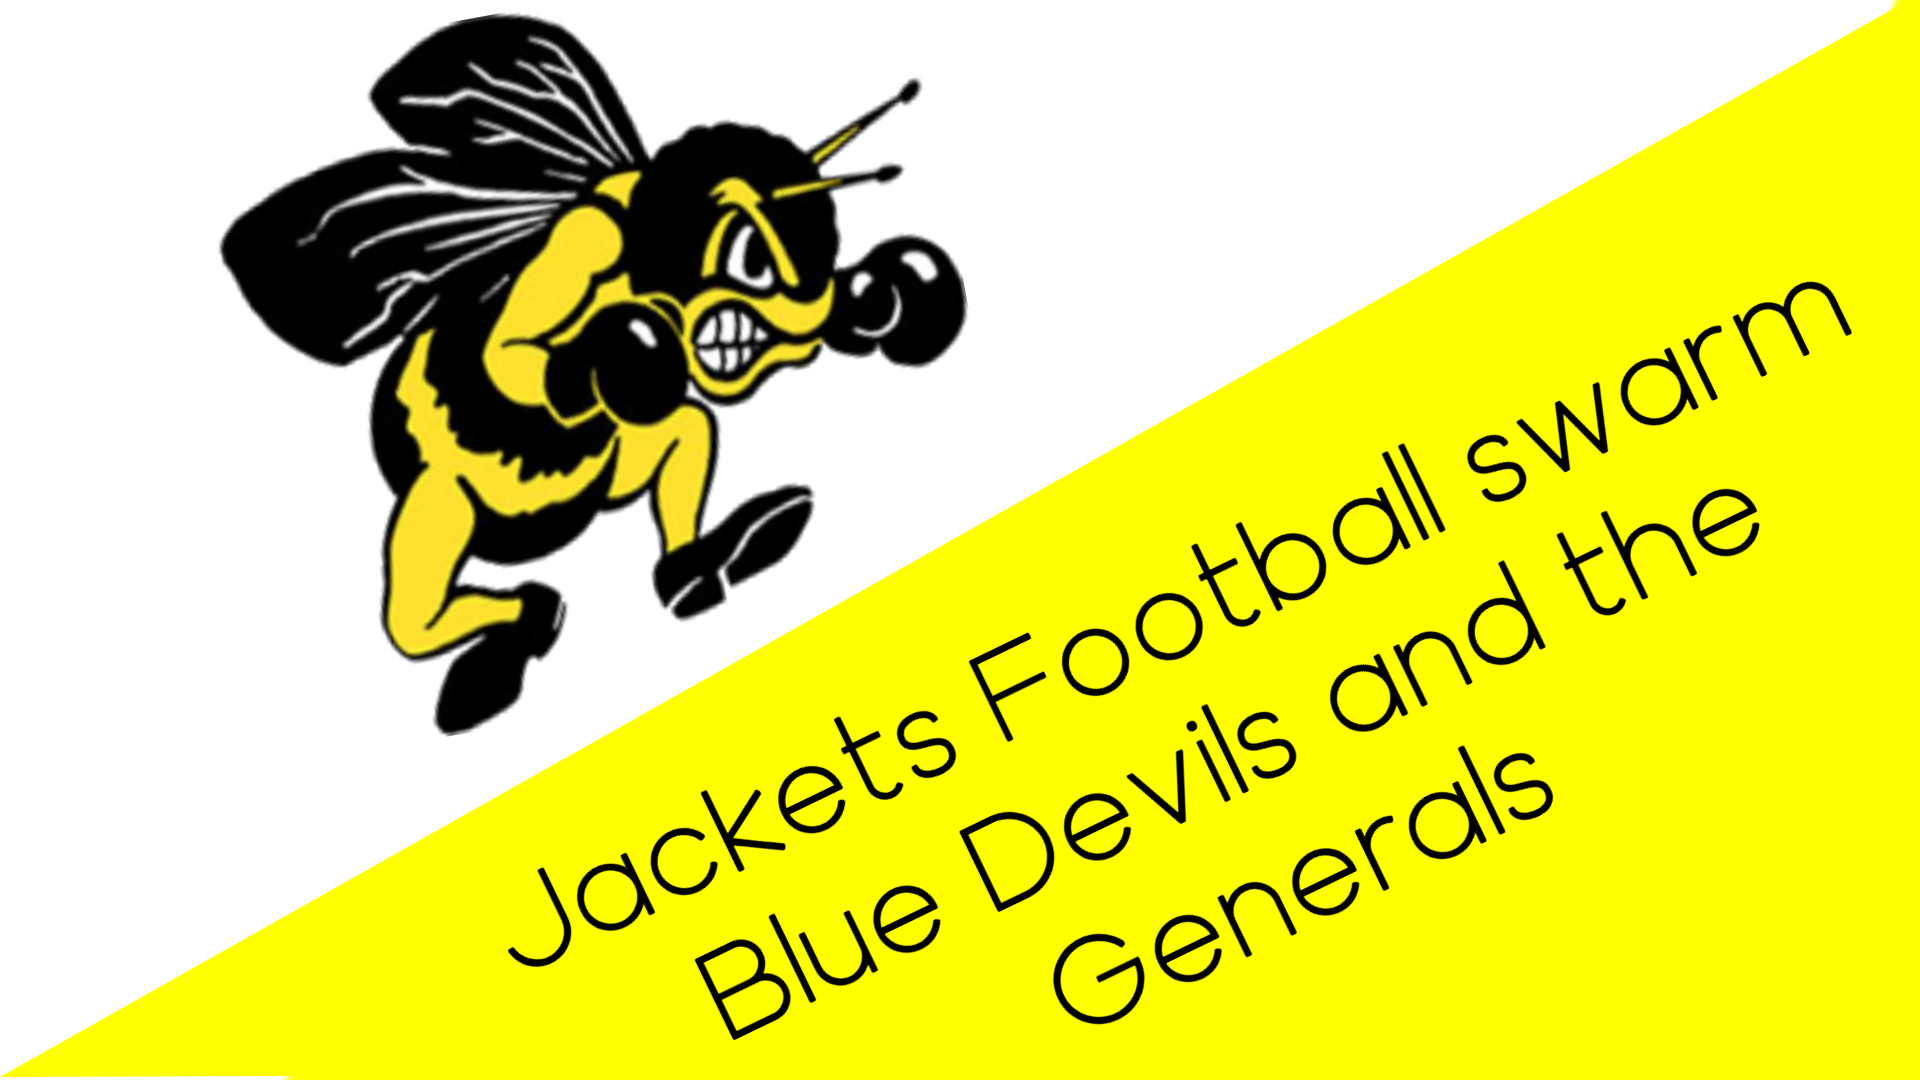 Jackets Football Swarms Blue Devils and Generals